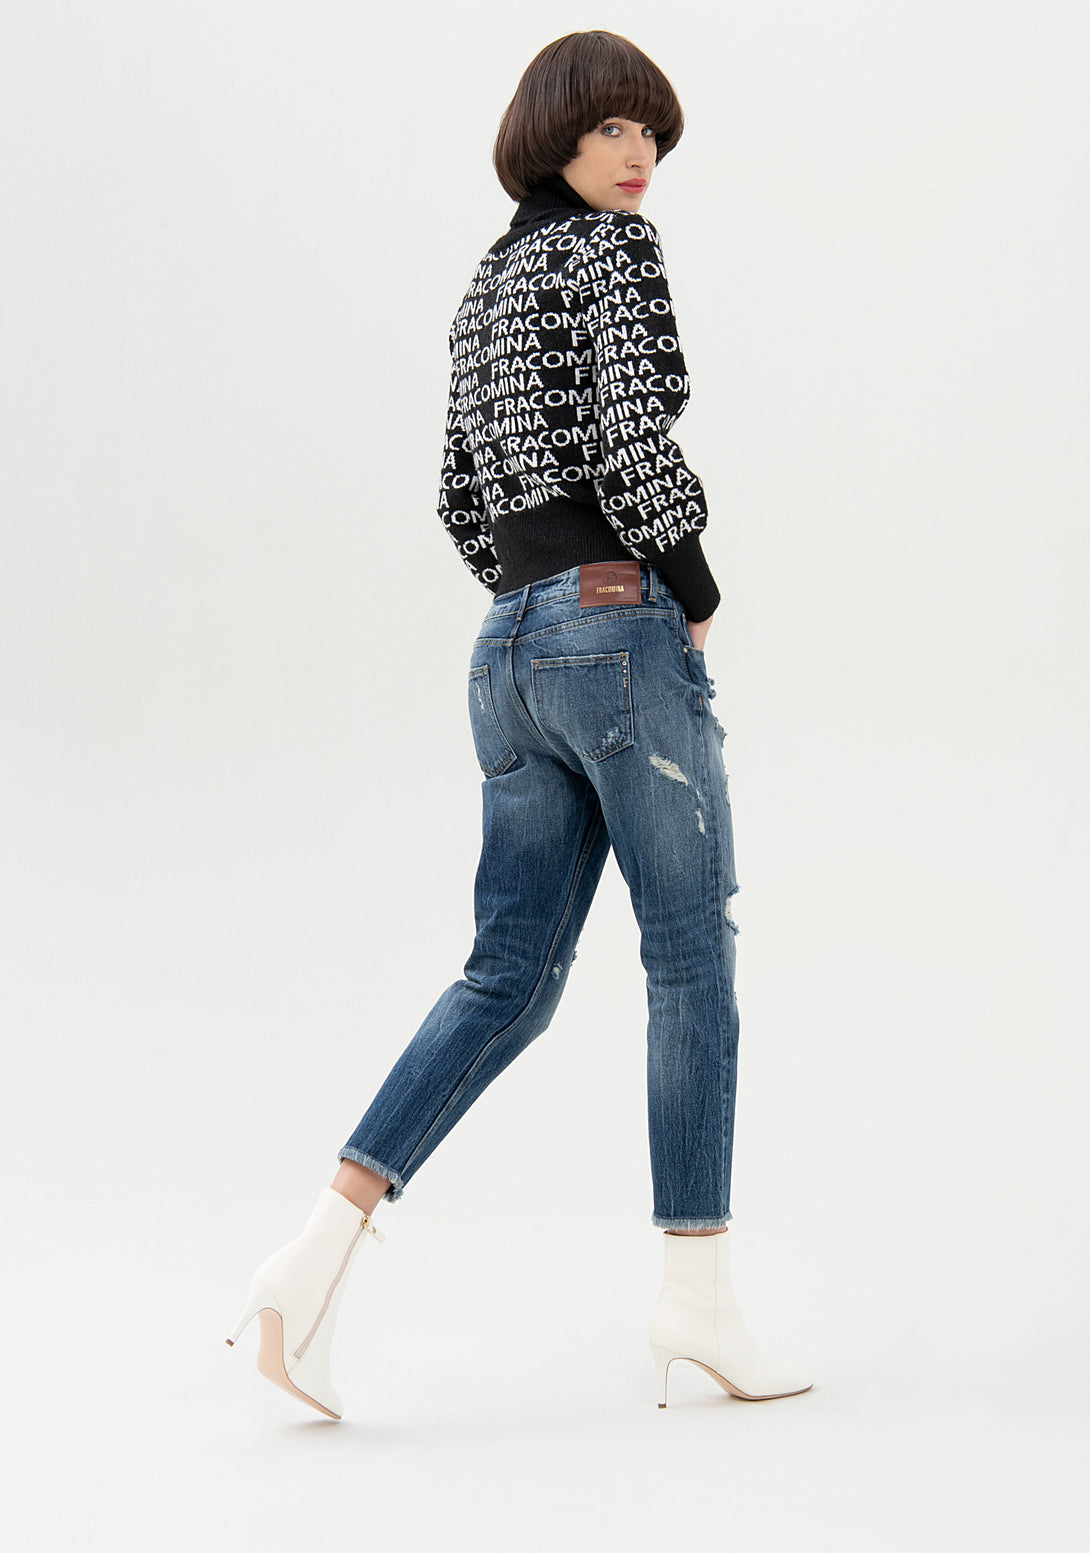 Jeans loose fit cropped made in denim with middle wash